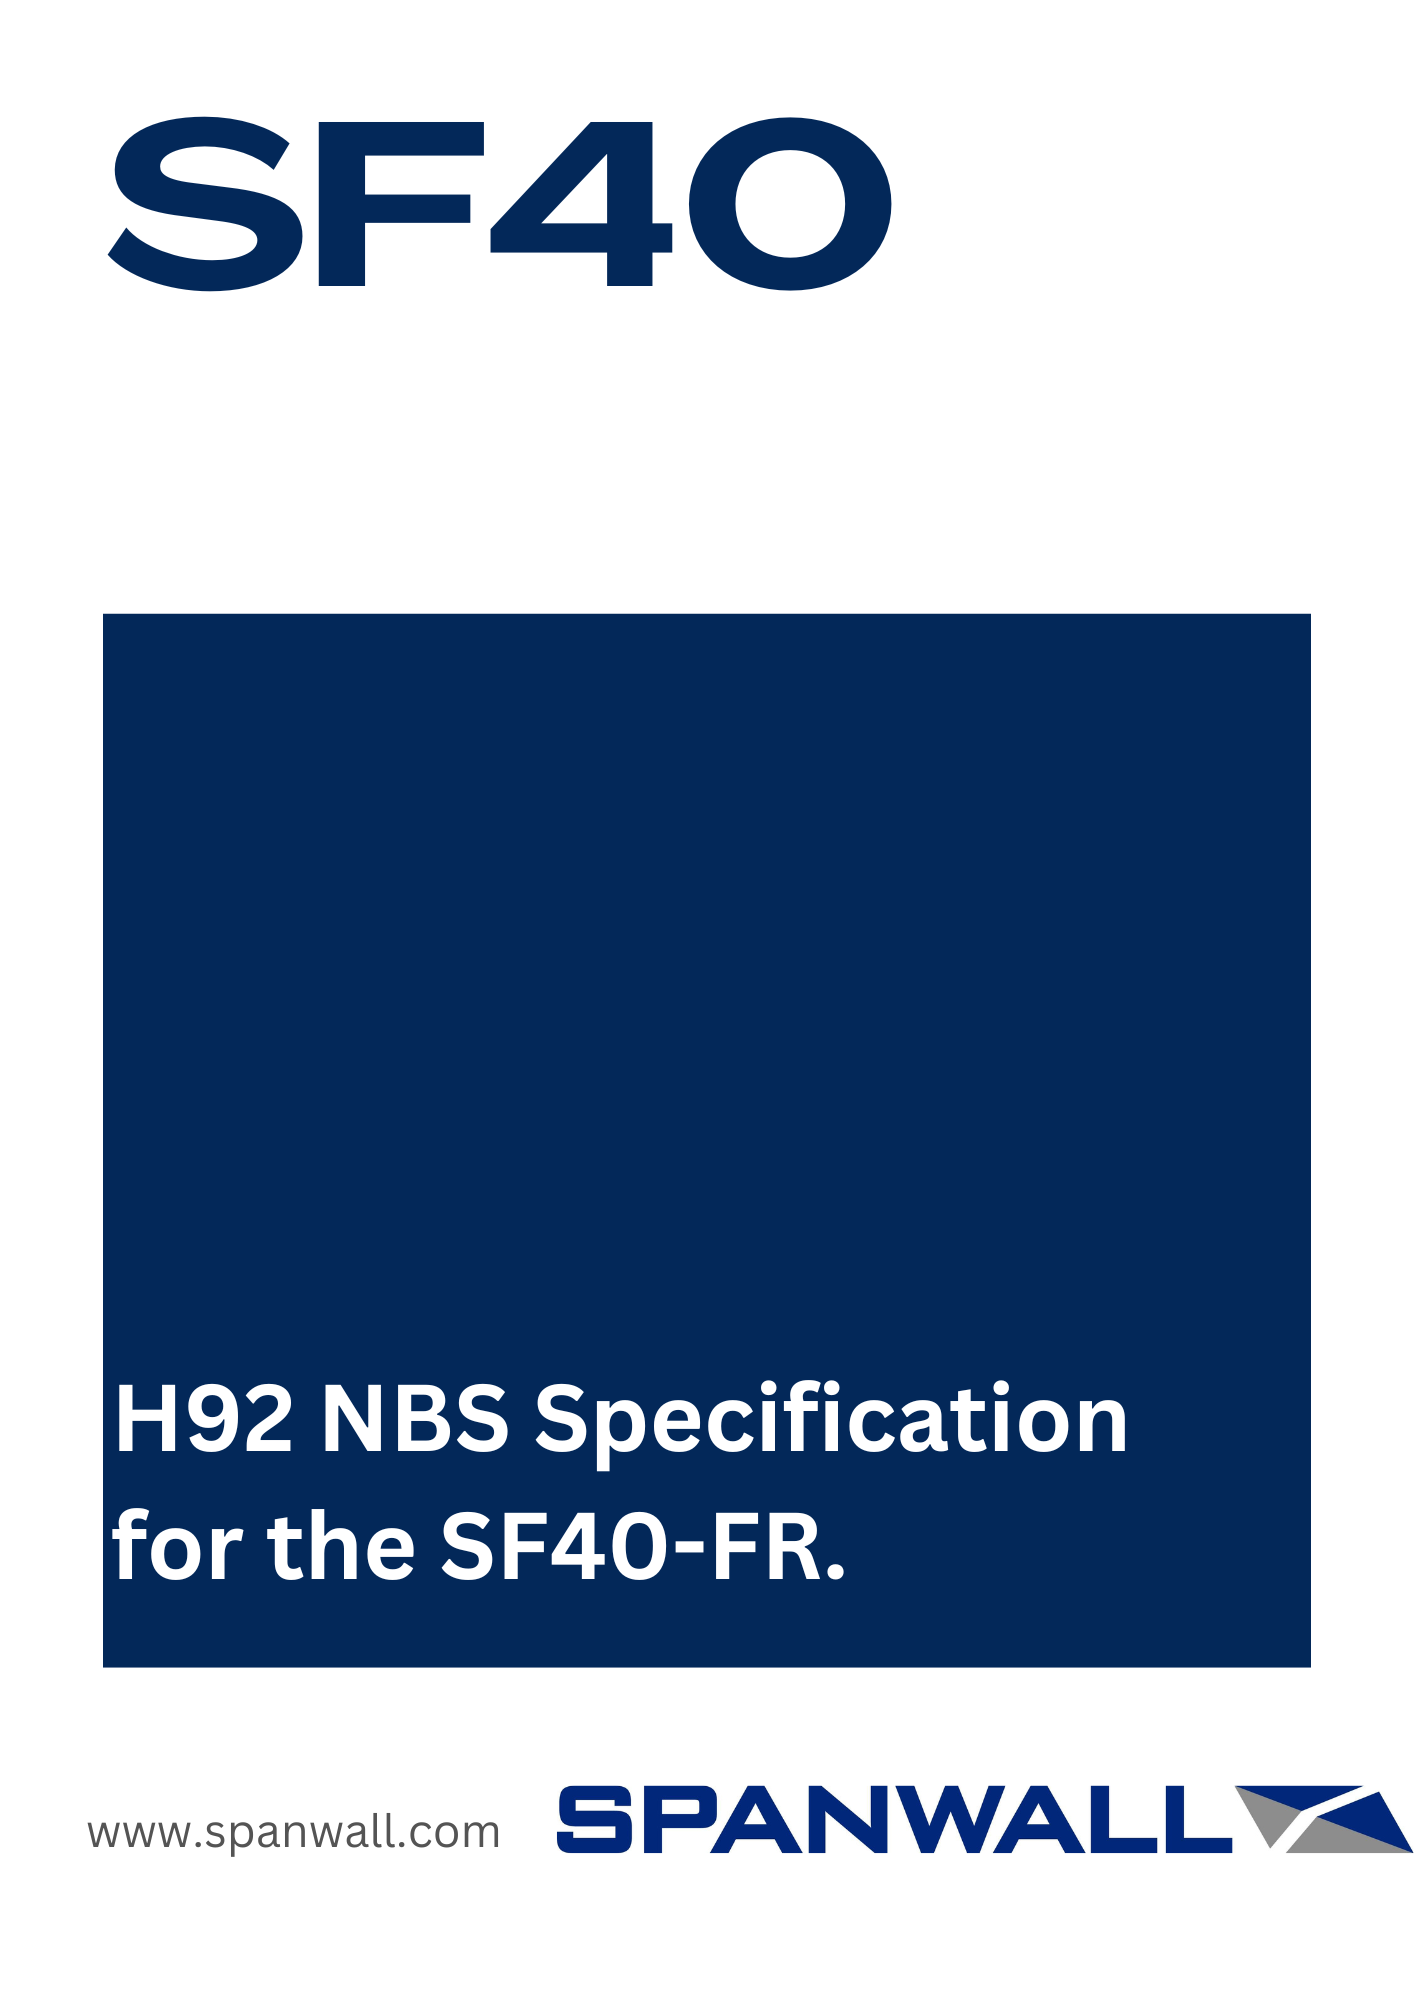 H92 NBS Specification for the SF40-FR.